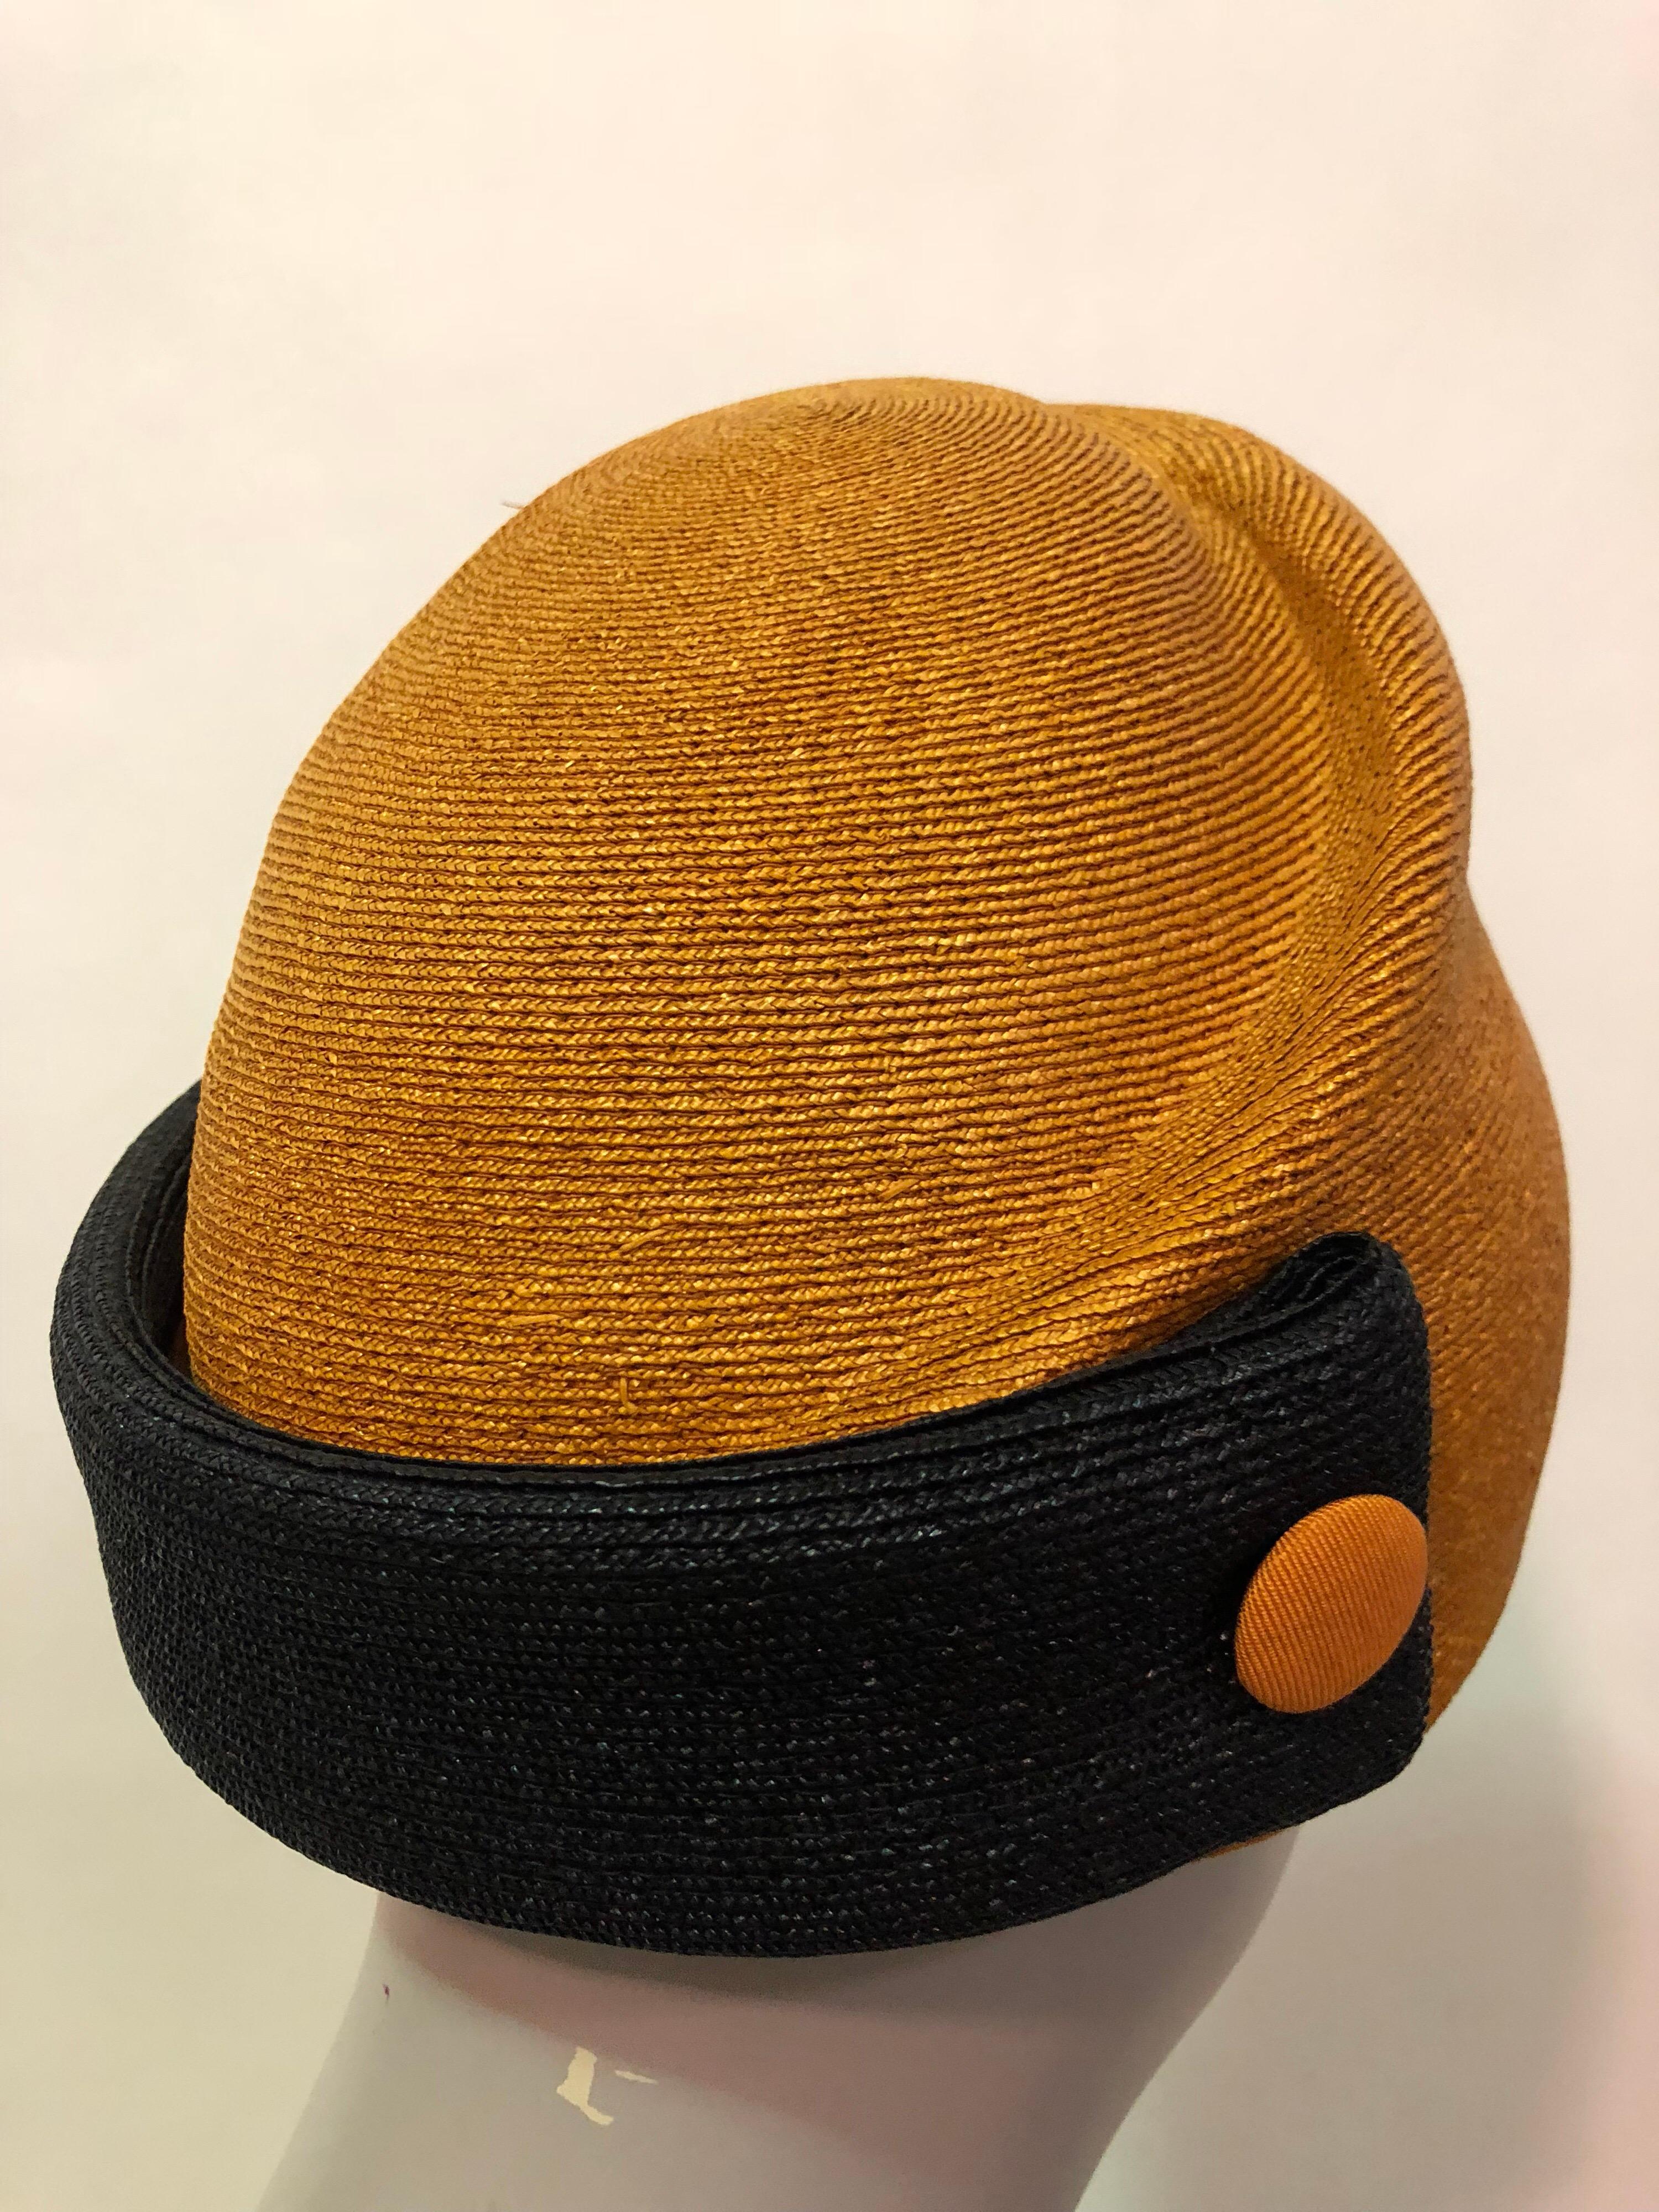 Featured here is a rare and unique Schiaparelli dome design hat from the mid 1950's. Unique molded crown of orange Milanese straw with a black straw band at back of the neck adds contrast to this design. Covered orange button details make this